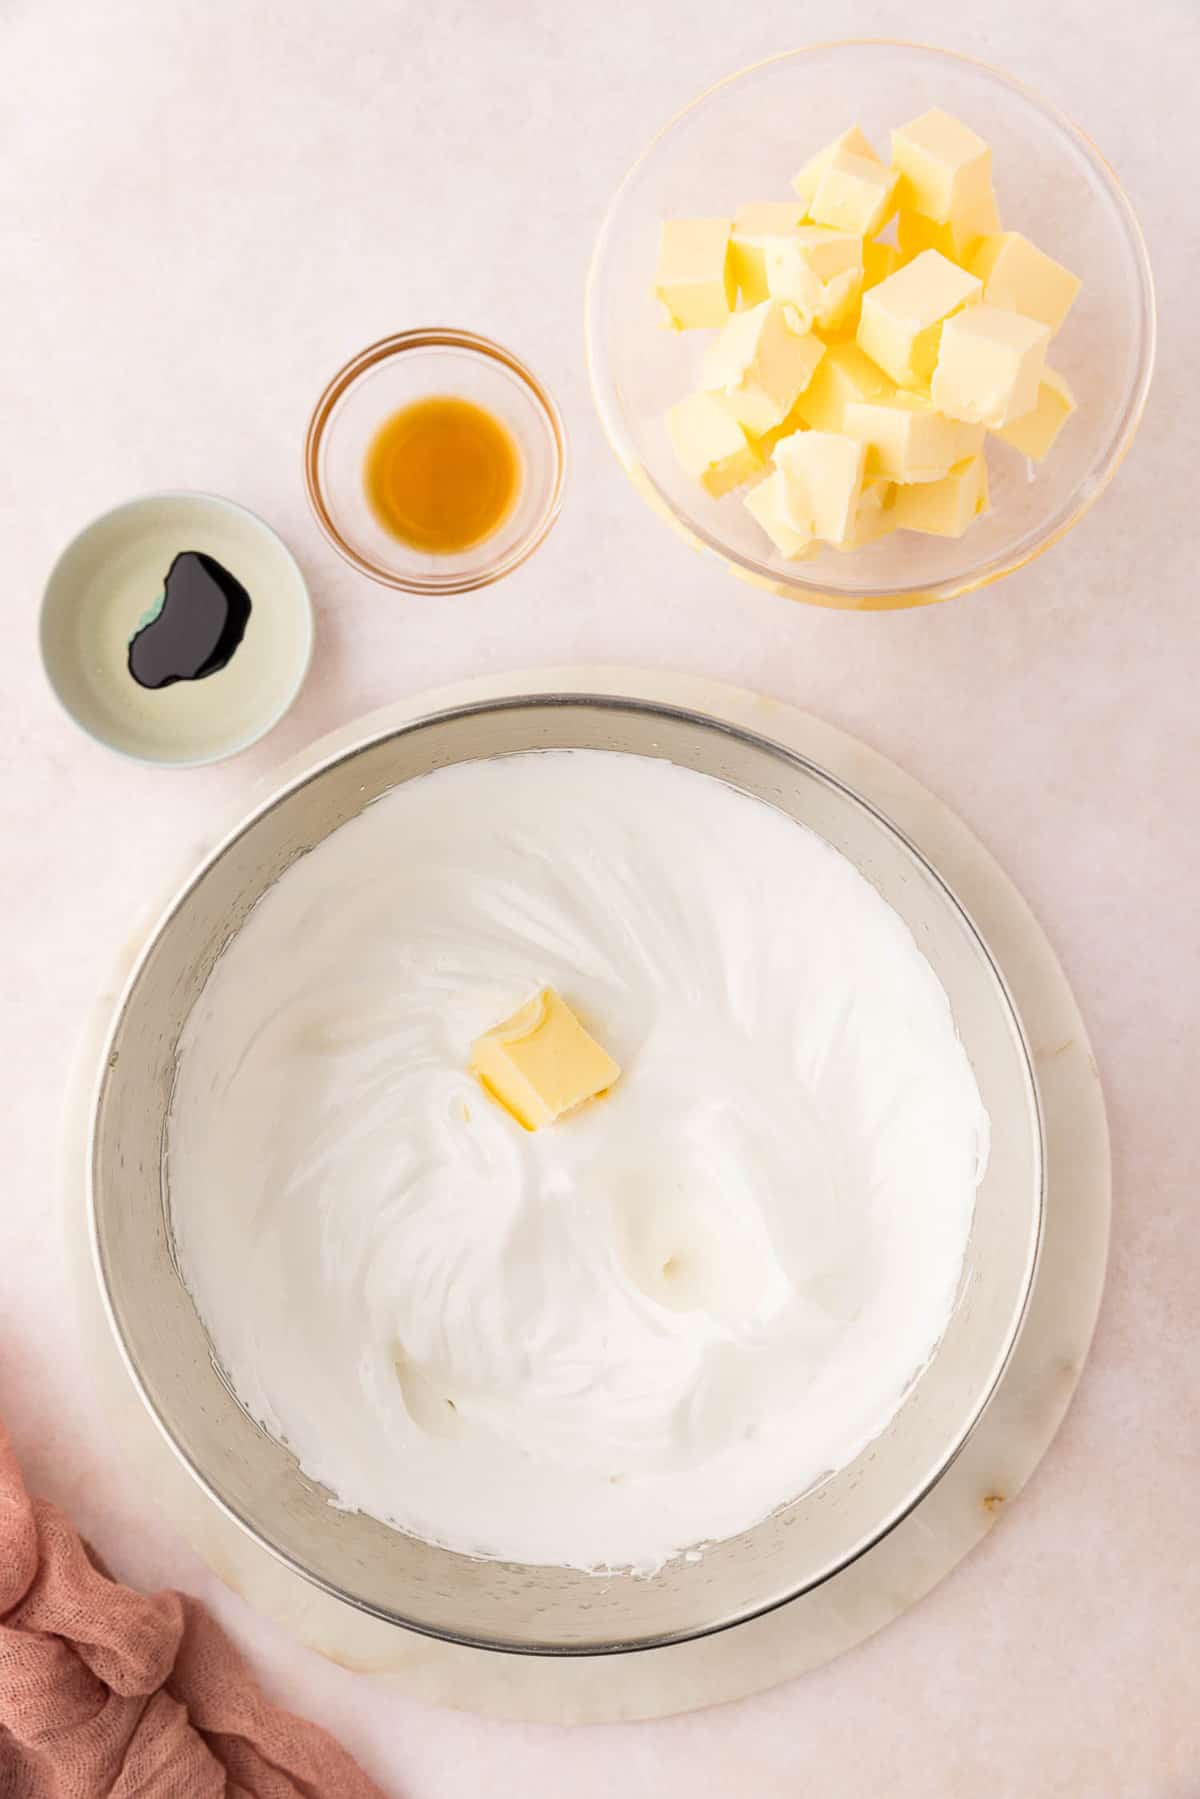 Adding Butter to Swiss Meringue Frosting for Easter Cupcakes